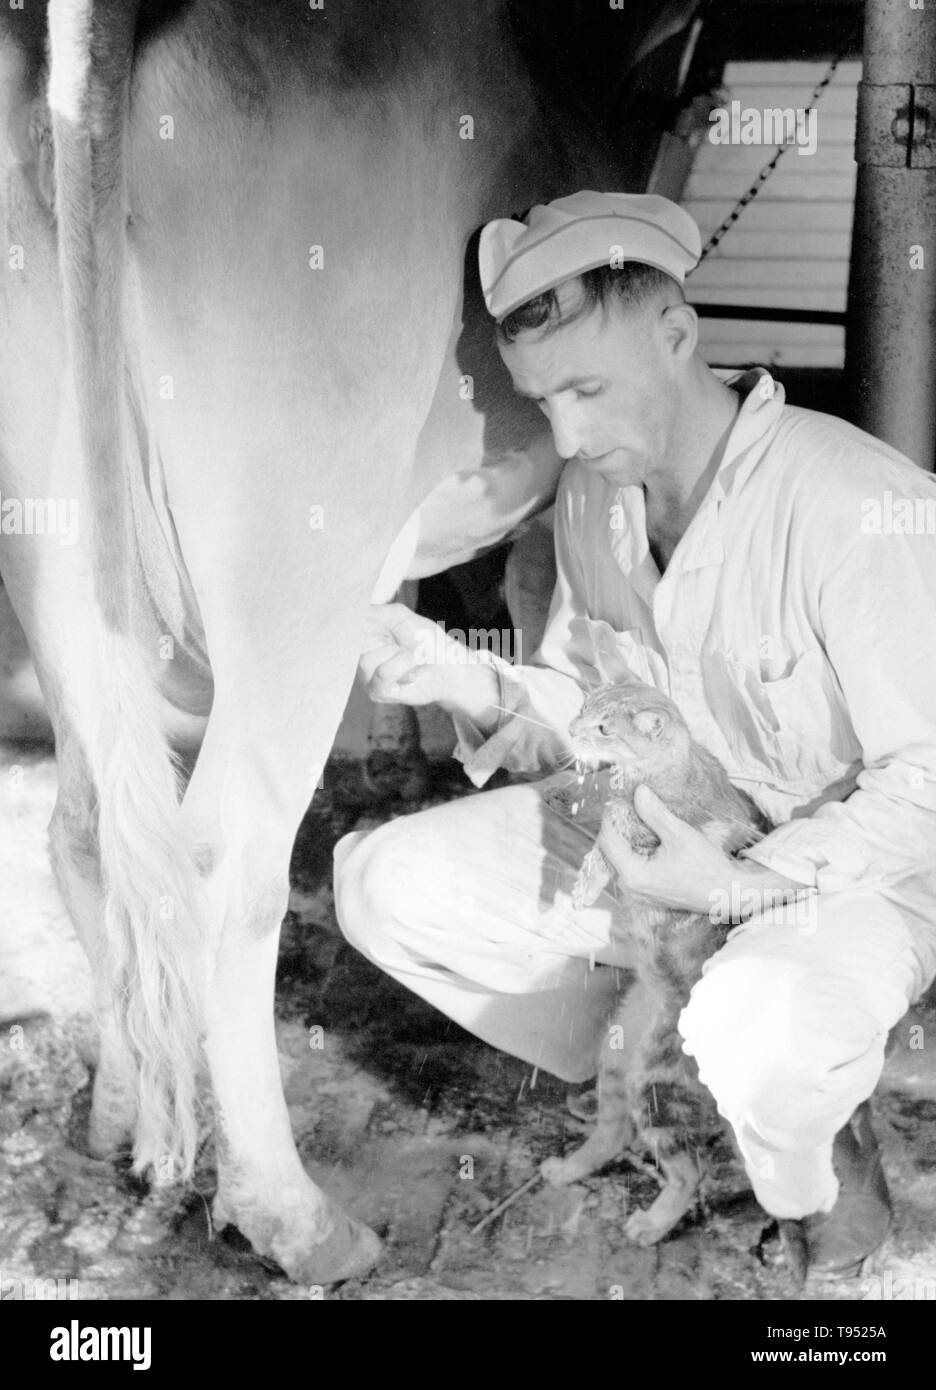 Entitled: 'Milker gives pet cat some milk direct from cow, Brandtjen Dairy Farm, Dakota County, Minnesota'. Milking is the act of removing milk from the mammary glands of cattle, water buffalo, goats, sheep and more rarely camels, horses and donkeys. Milking may be done by hand or by machine, and requires the animal to be currently or recently pregnant. The milker may refer either to the animal that produces the milk or the person who milks said animal. Photographed by Arthur Rothstein, 1939. Stock Photo